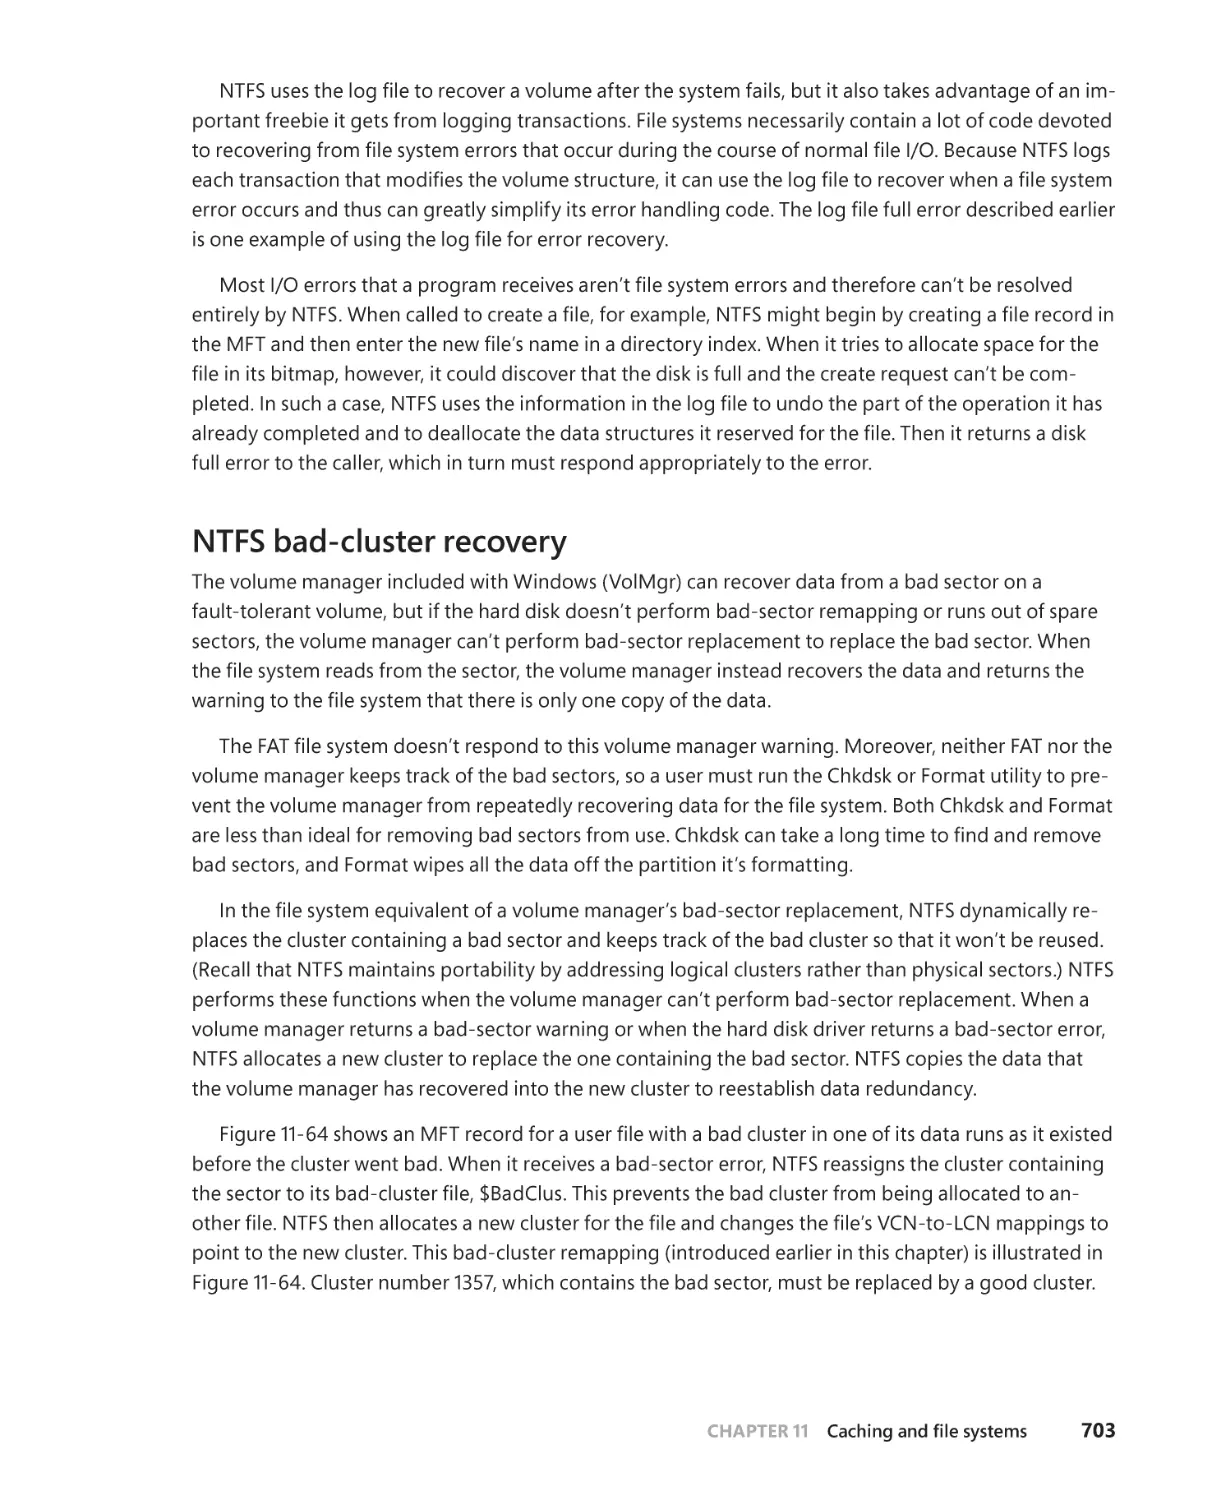 NTFS bad-cluster recovery